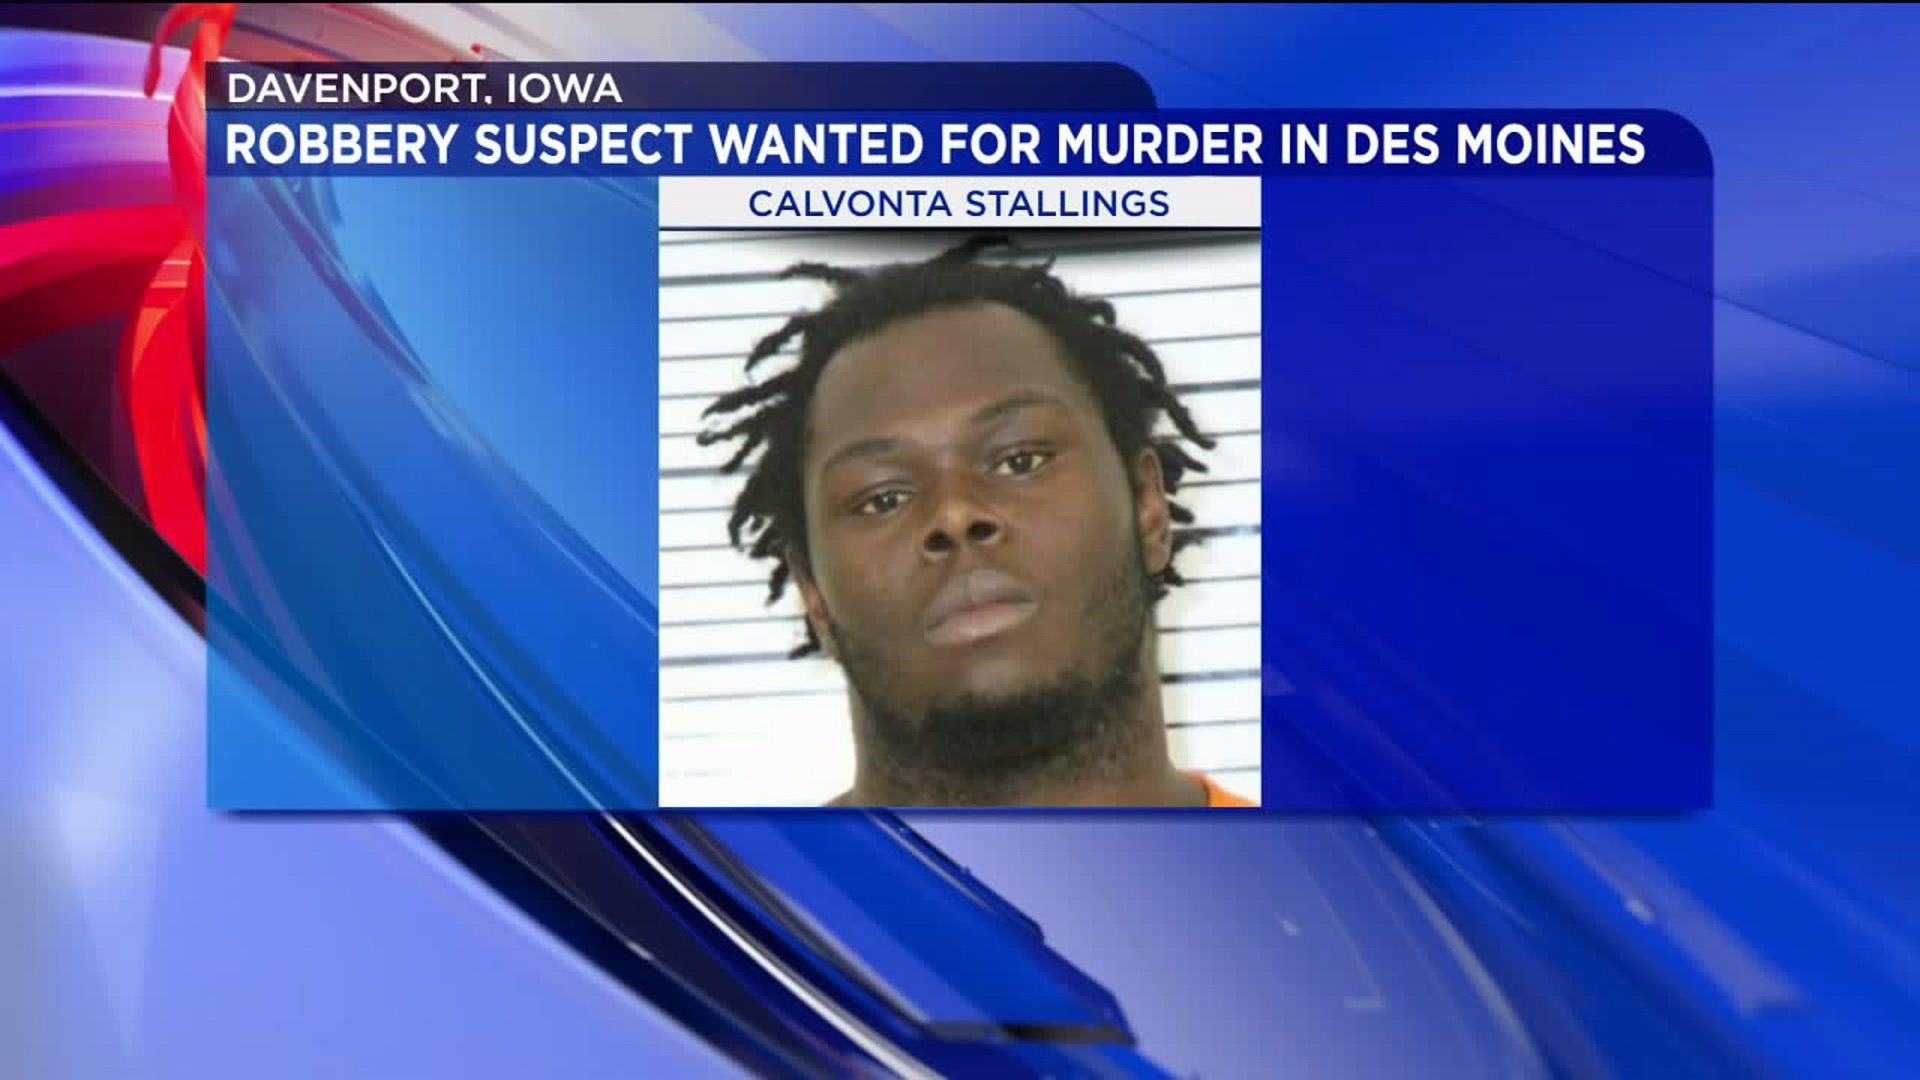 Davenport police catch robber also wanted for murder